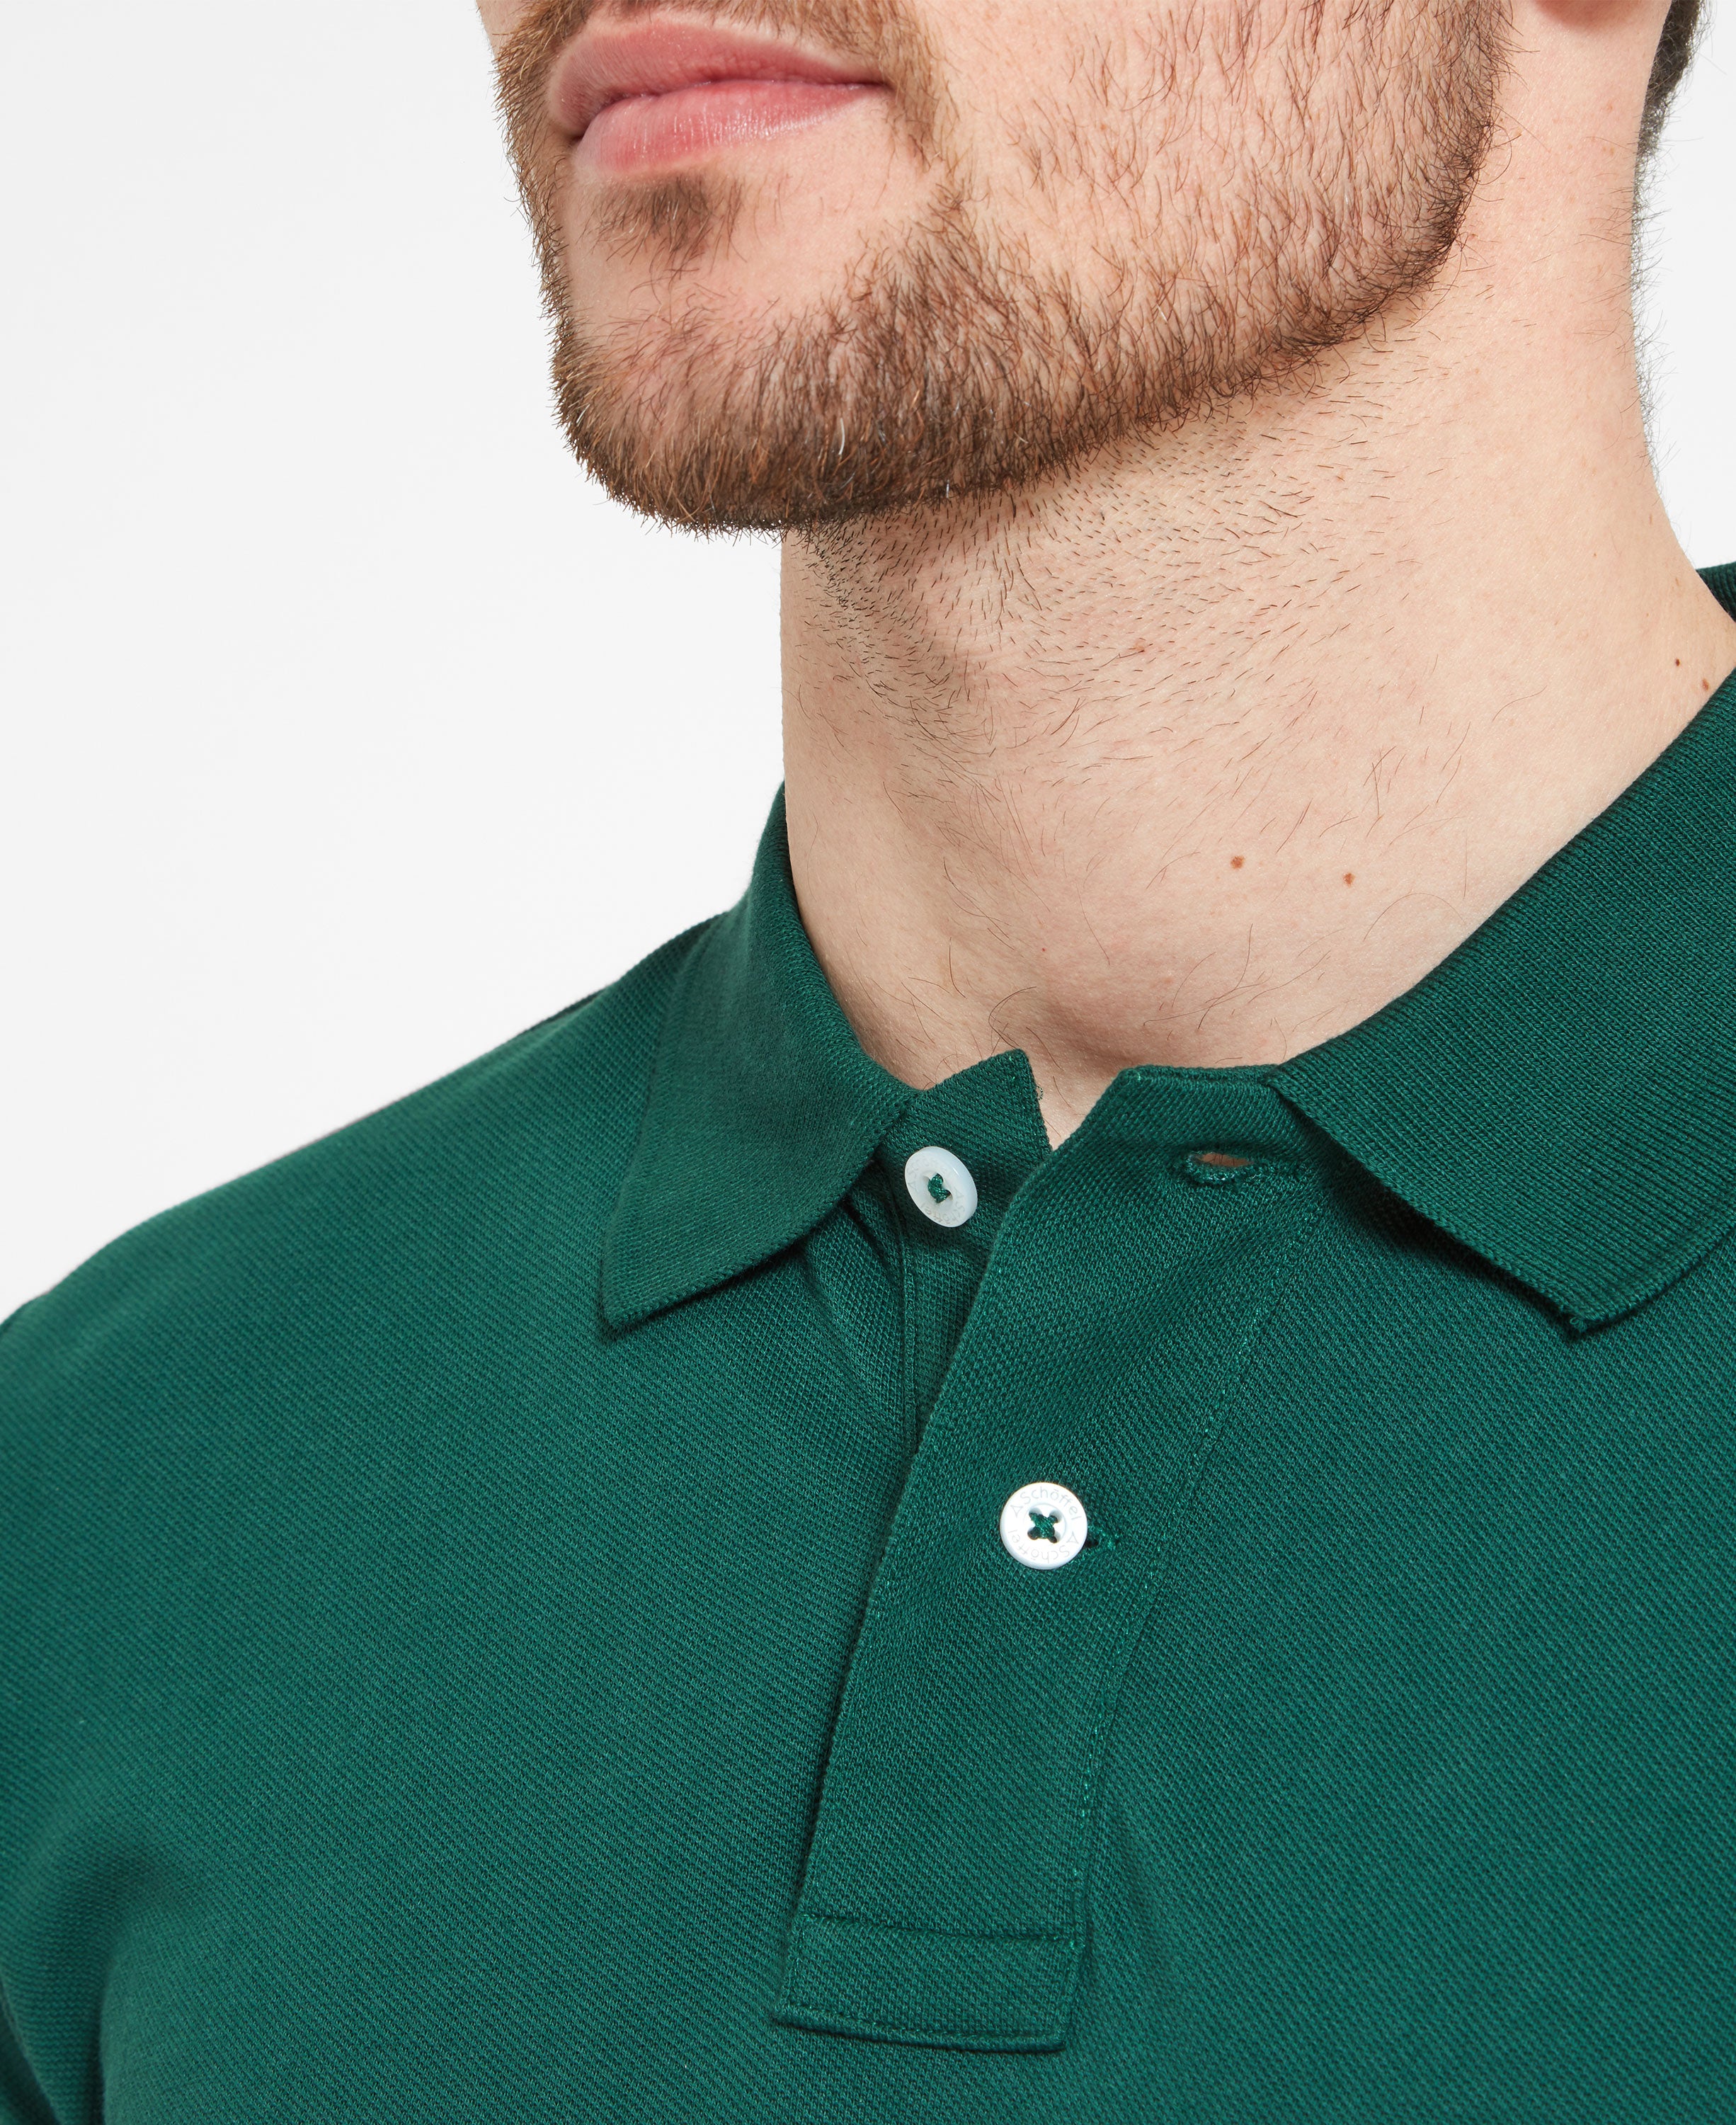 Exeter Heritage Polo Shirt - Navy